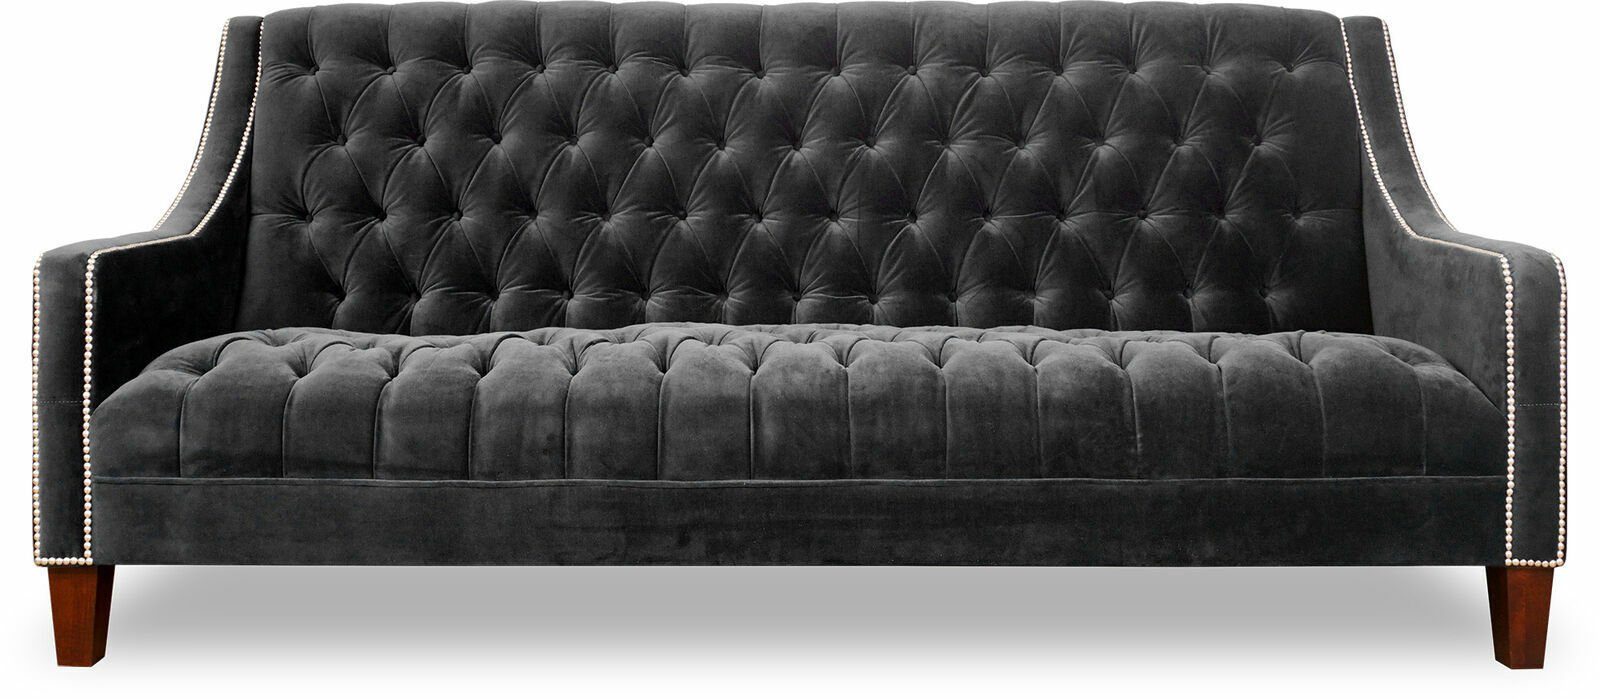 JVmoebel 3-Sitzer Design grau Sofa 3 Sitzer Chesterfield Stoff Couch Polster Sofas, Made in Europe